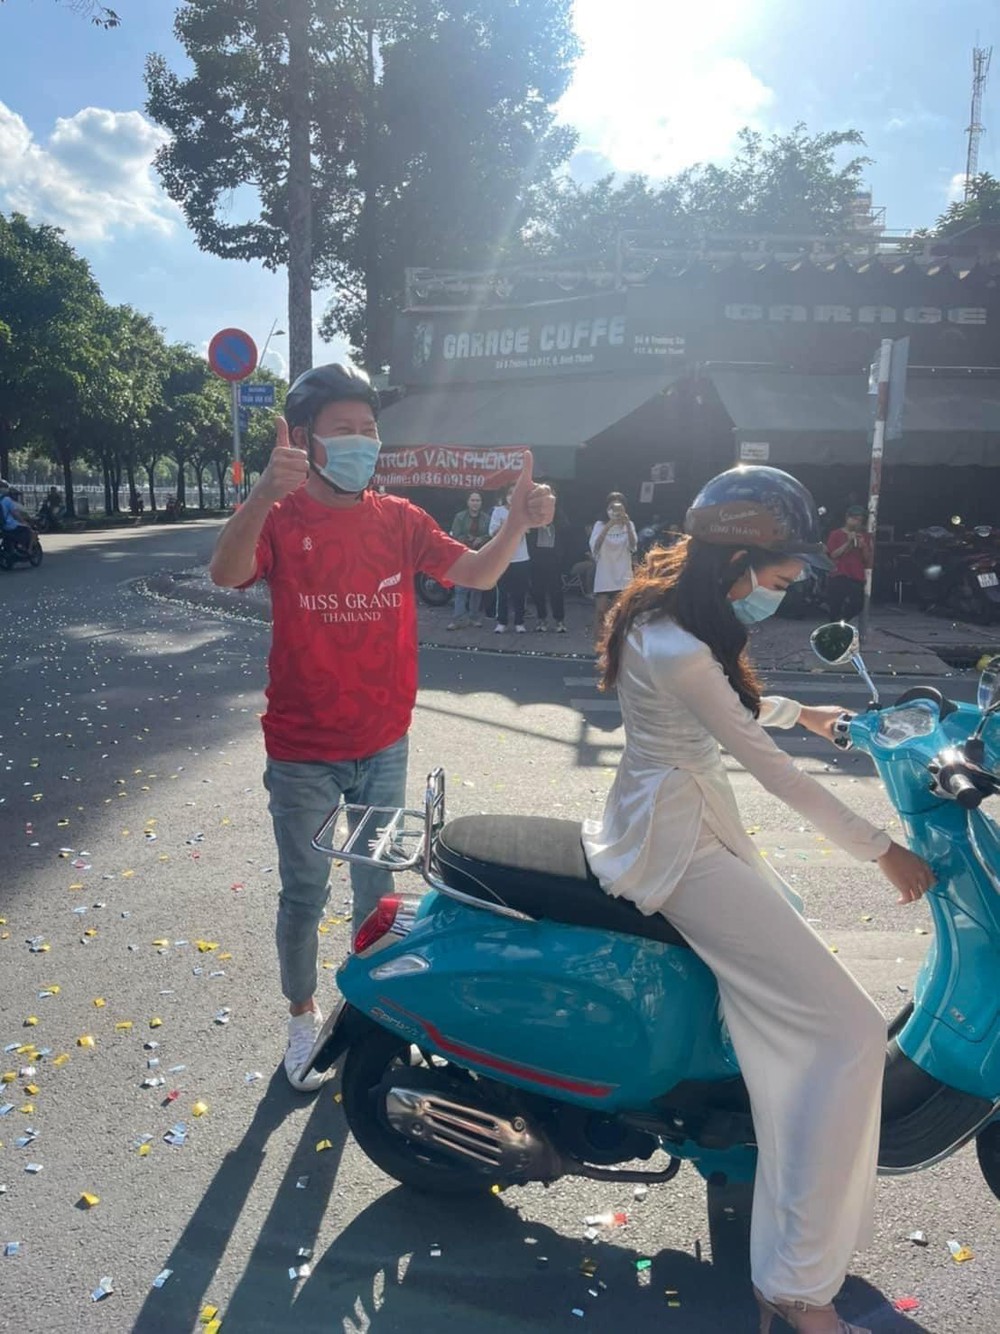 Having just arrived in Vietnam, Mr.  Nawat revealed a photo that was carried by Miss Thuy Tien on a motorbike on the streets of Ho Chi Minh City - Photo 2.